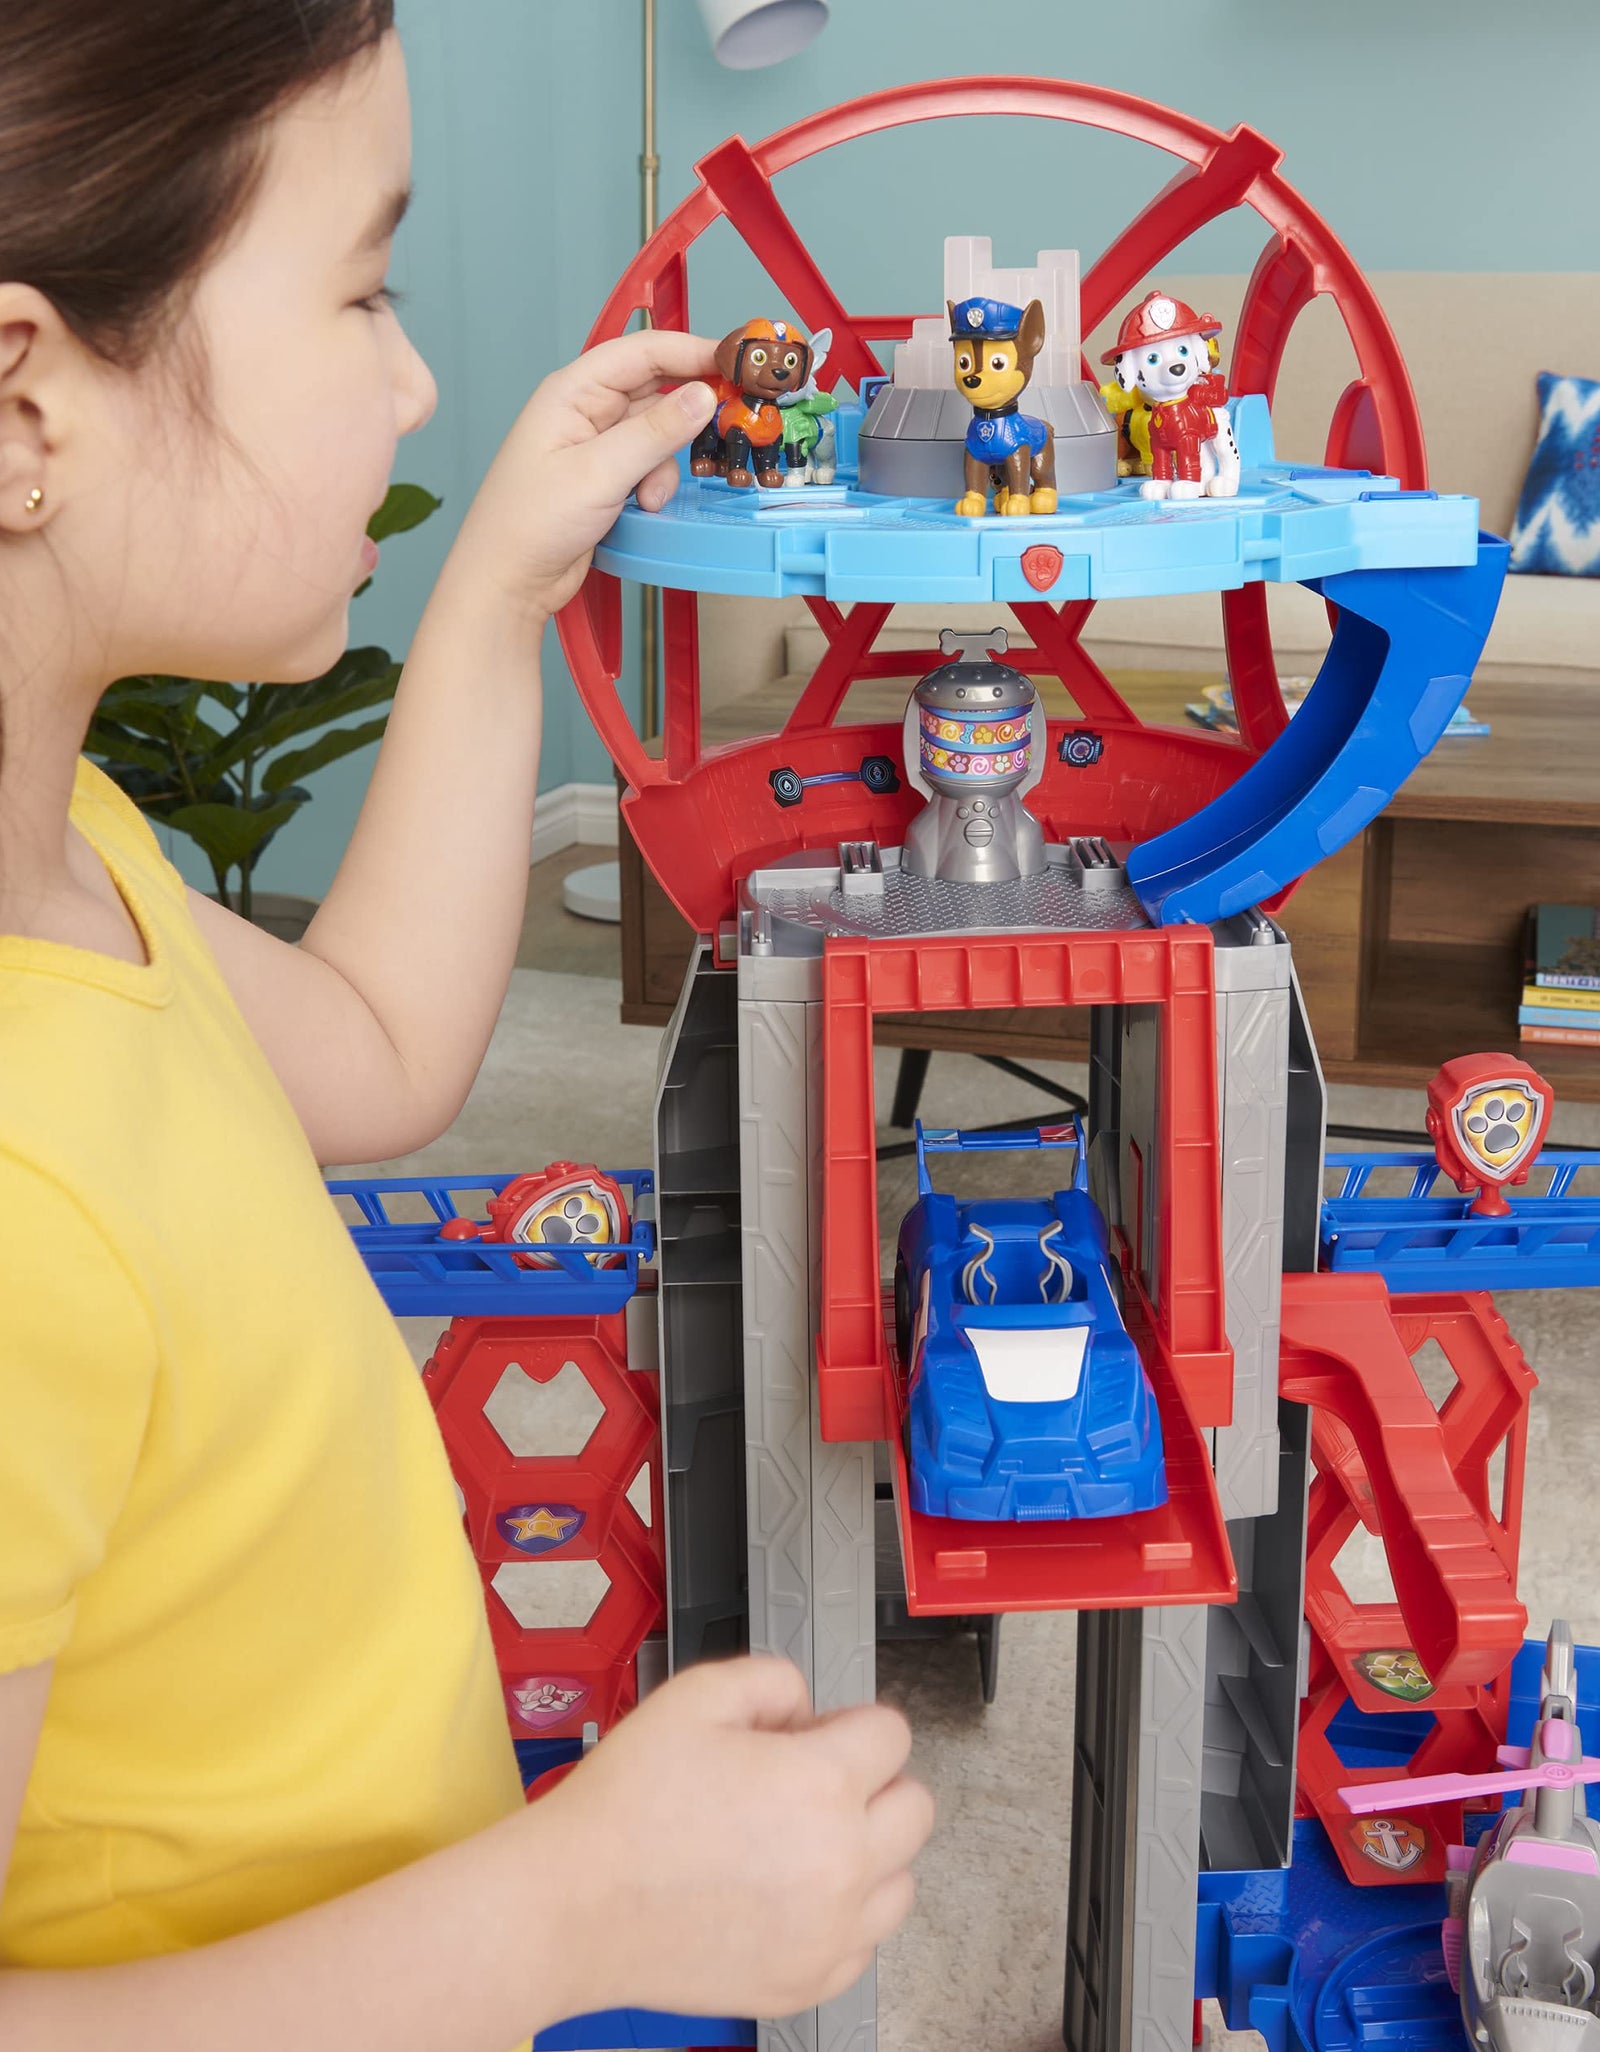 Paw Patrol, Movie Ultimate City 3ft. Tall Transforming Tower with 6 Action Figures, Toy Car, Lights and Sounds, Kids Toys for Ages 3 and up